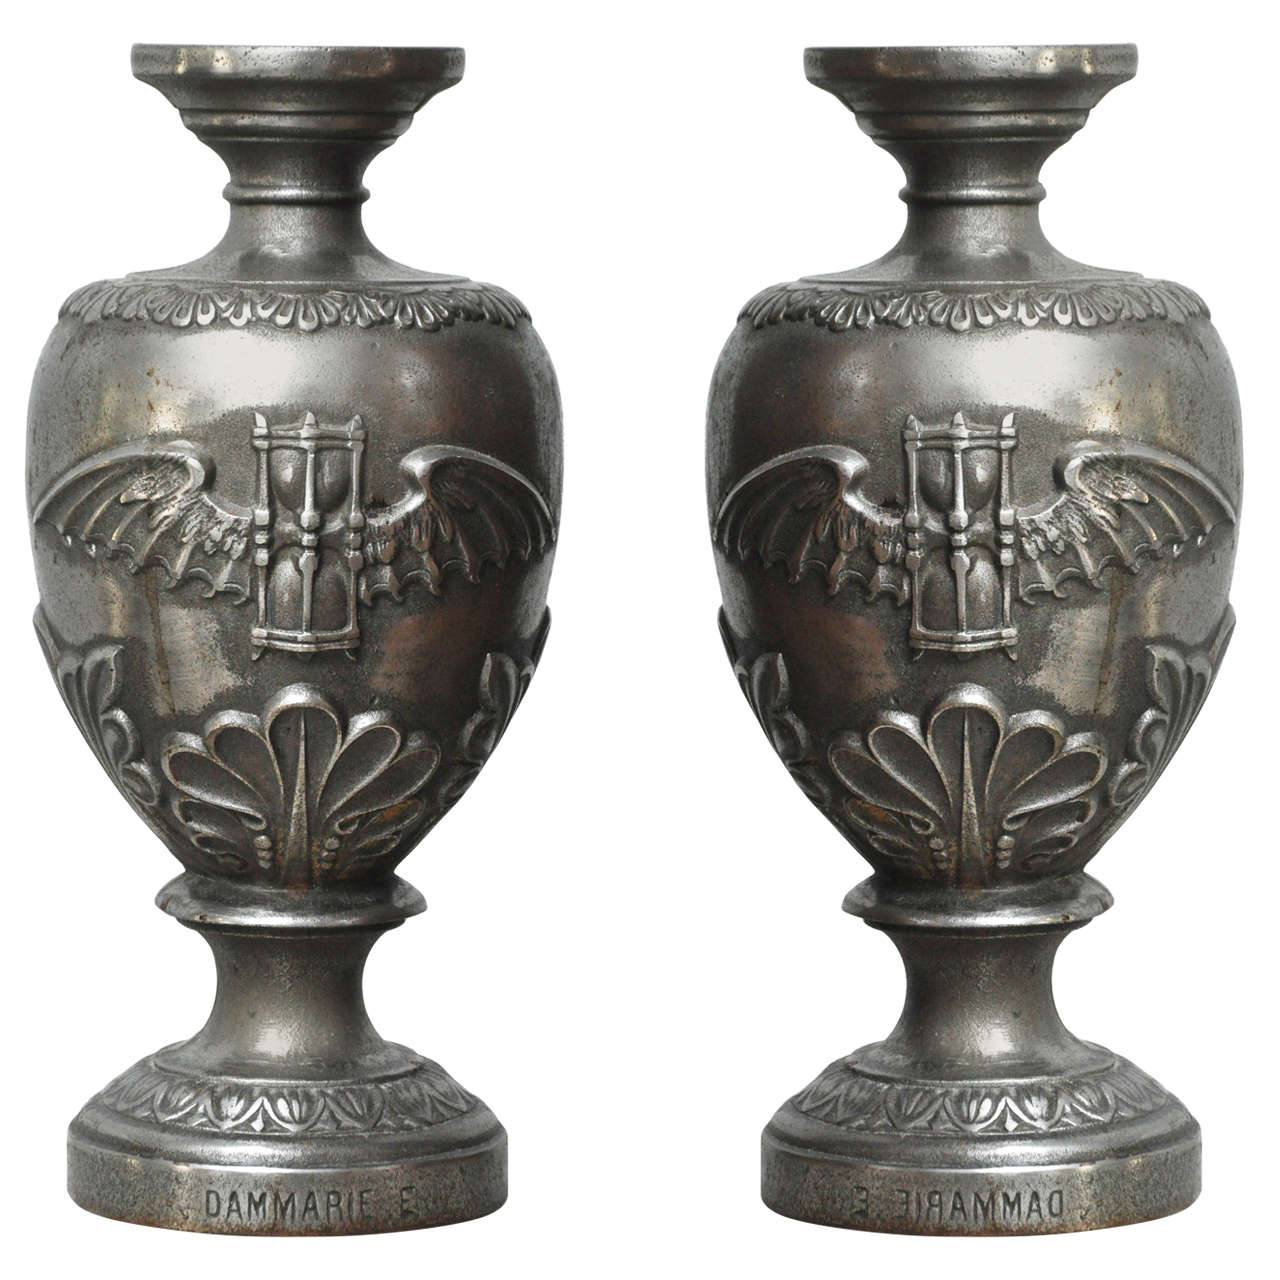 Pair of Large Art Deco Cast Iron Urns signed Dammarie E, France, 1930  For Sale